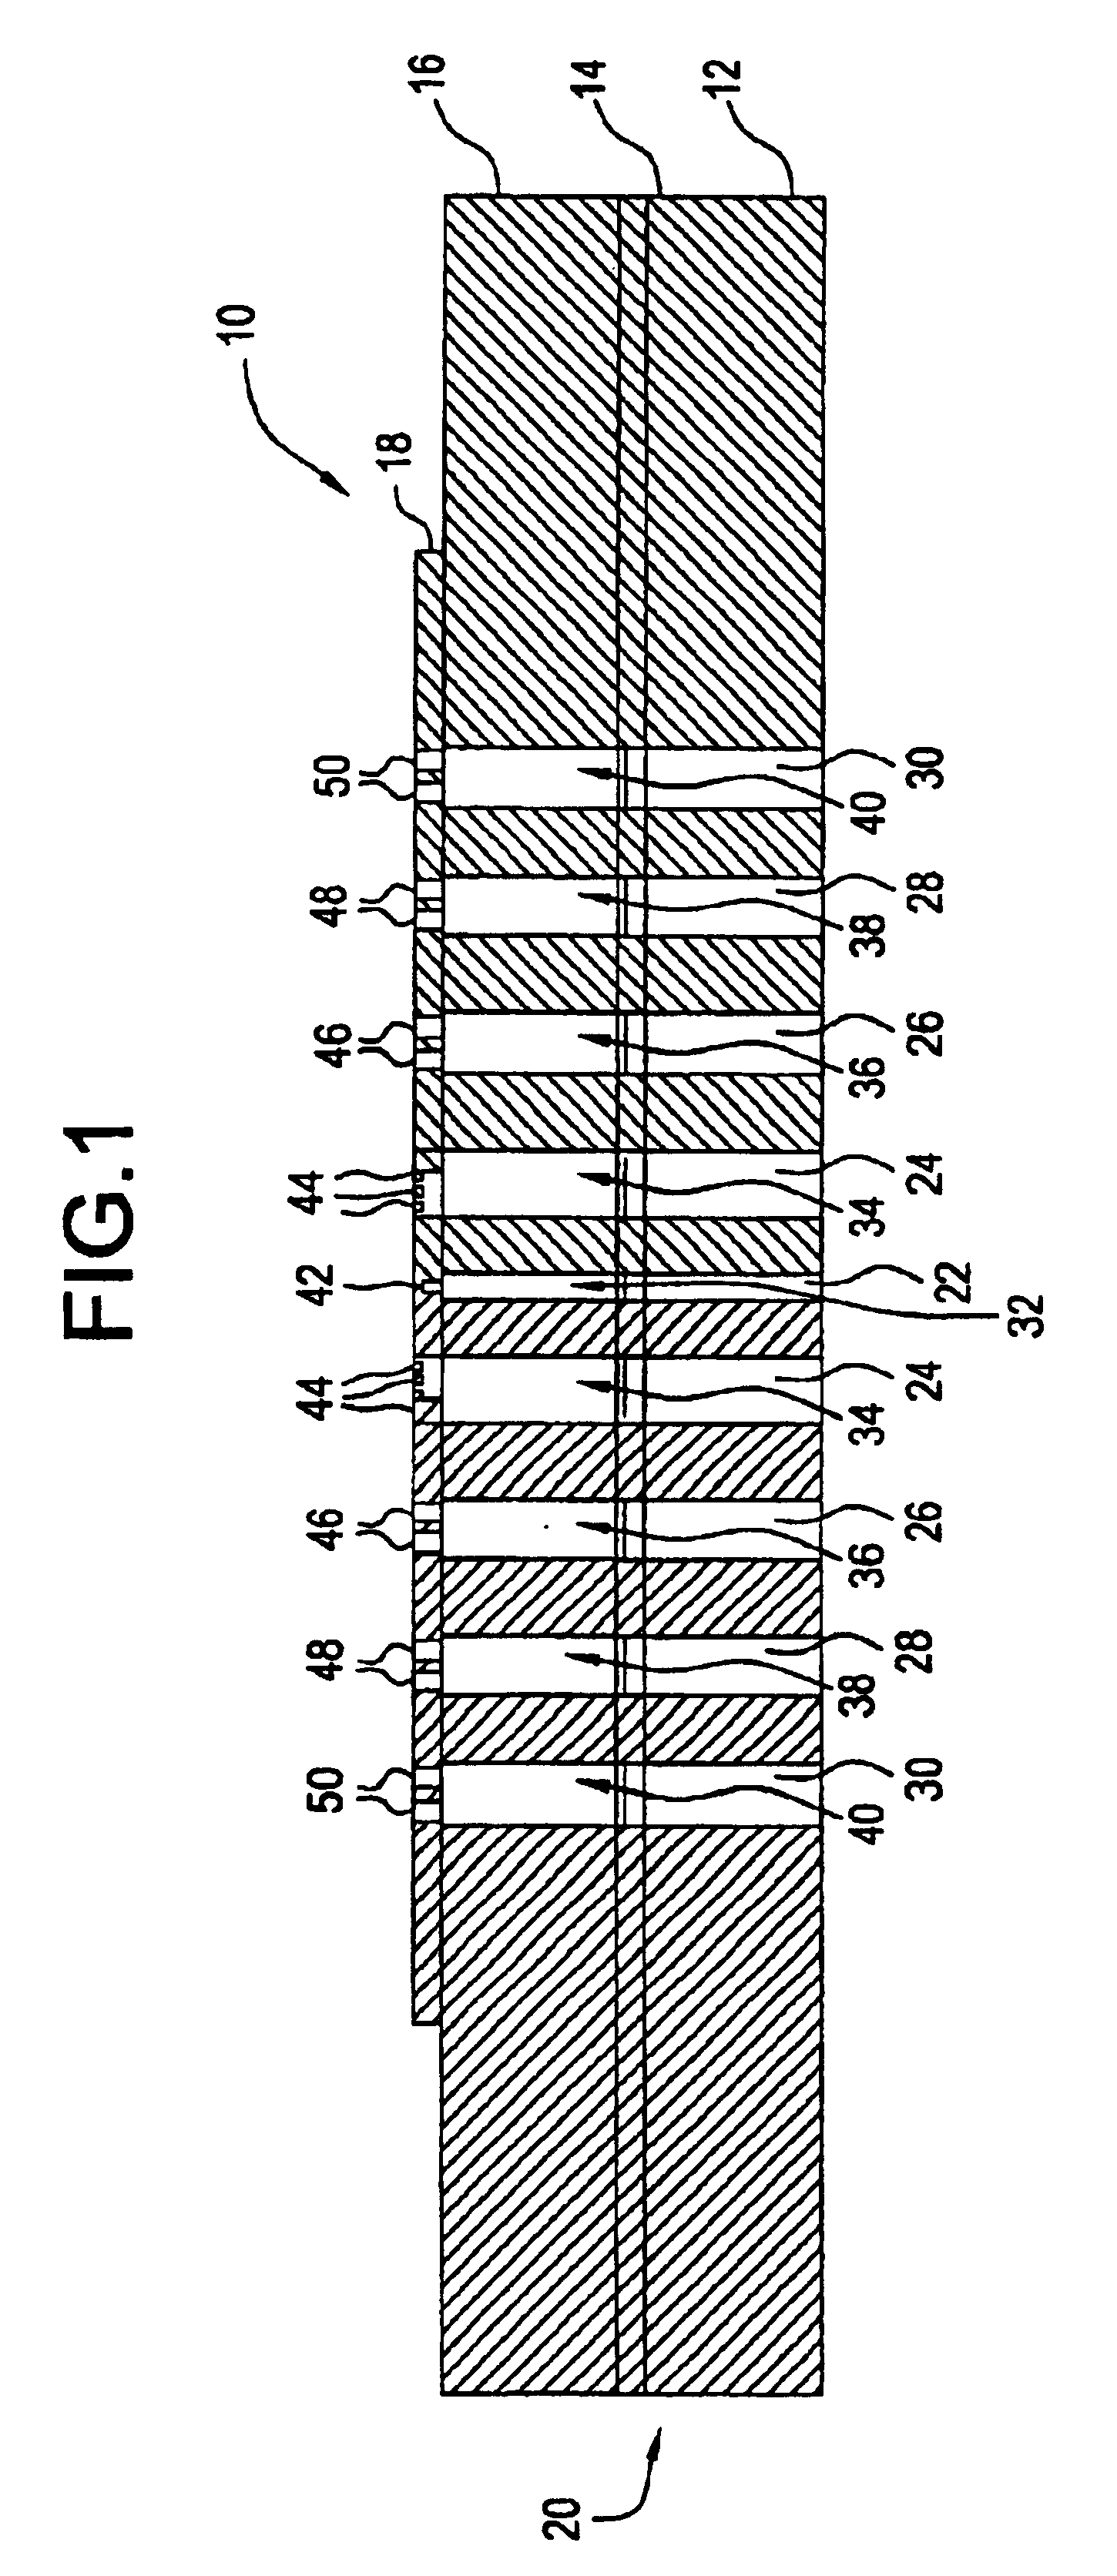 Method of producing oxide soot using a burner with a planar burner face